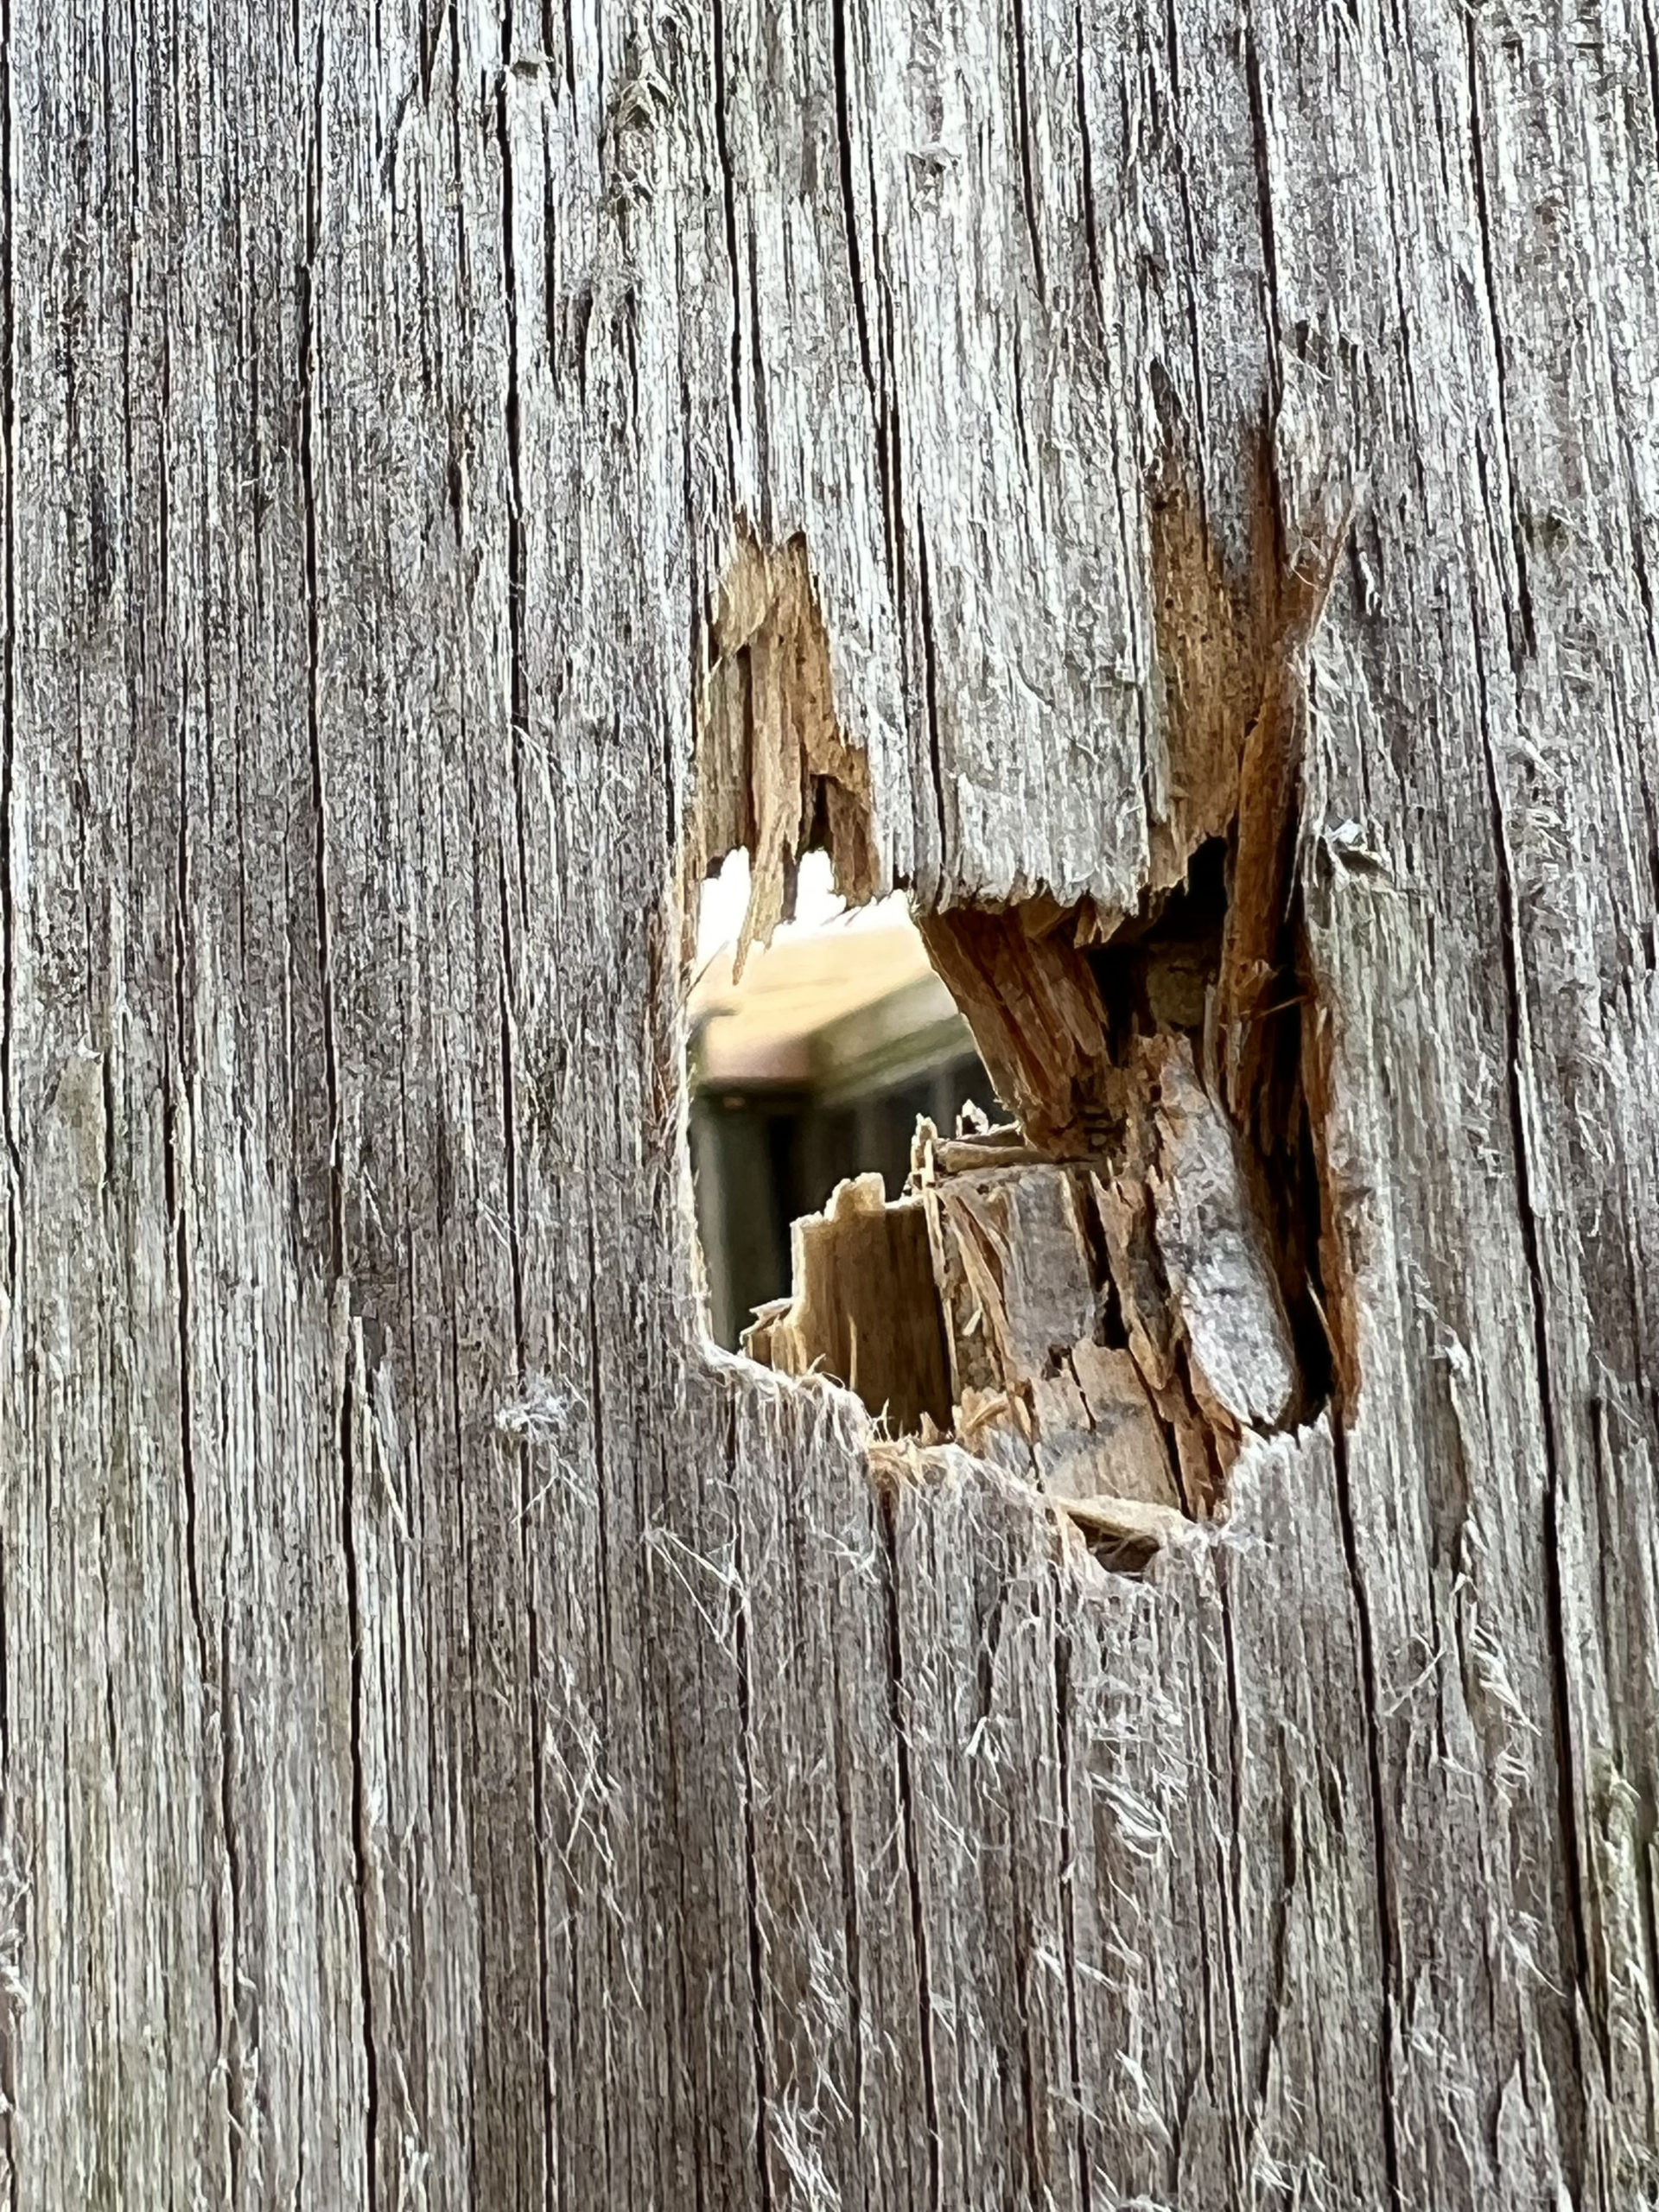 A second bullet hole just yards away from where workers were repairing a roof on one of the animal enclosures.  DANA SHAW